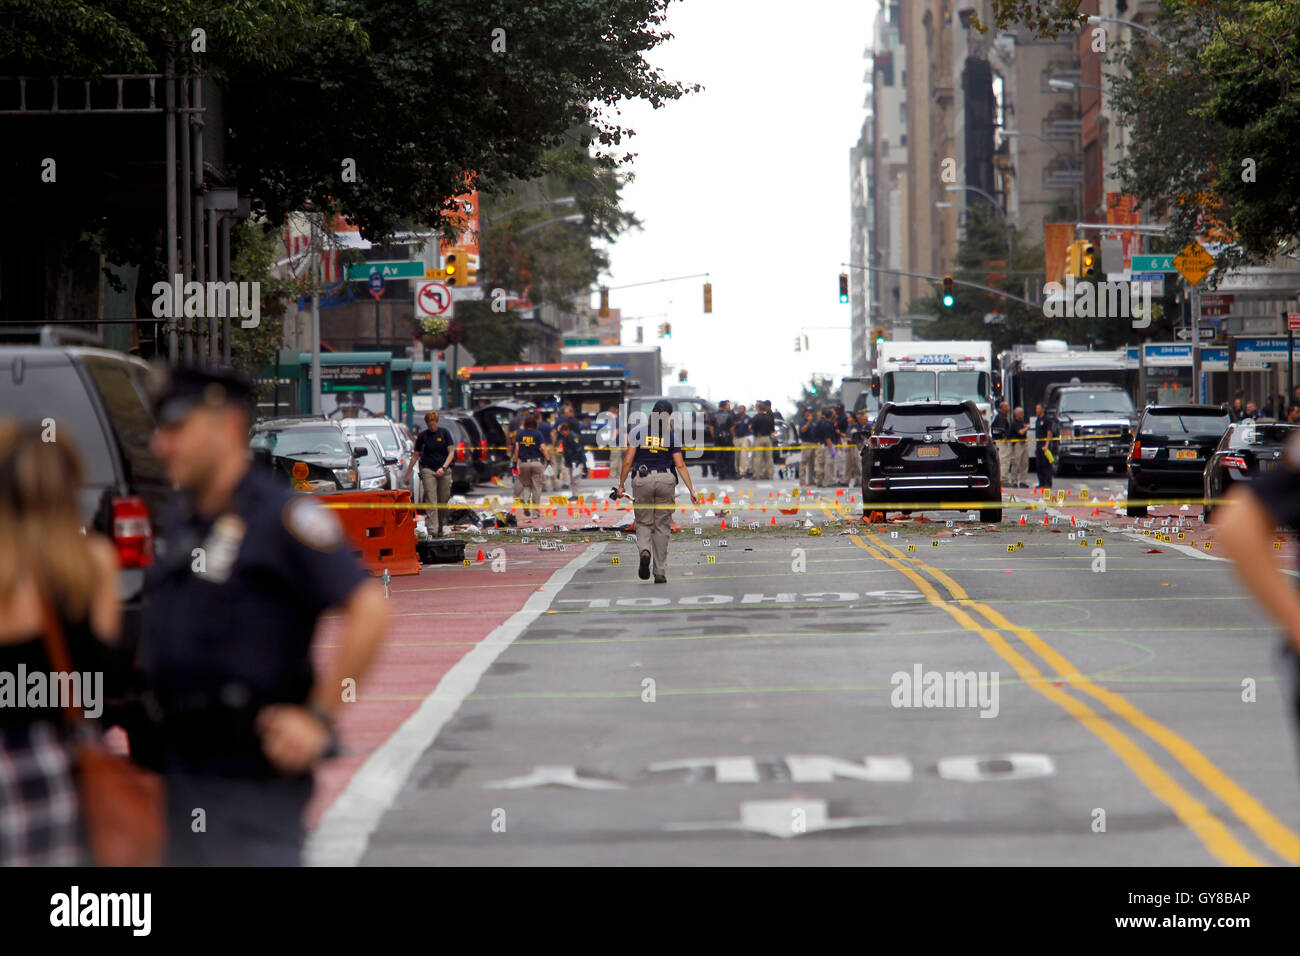 New York, USA. 18th Sep, 2016. Police, and law enforcement personnel from various agencies examine the area for clues the morning after last night's explosion on New York's West 23rd Street between 6th and 7th Avenues in the Chelsea section of Manhattan.  the view is looking east on 23rd street from 7th Avenue towards 6th Avenue.  The area is marked for clues amidst the debris.  29 people were injured in the blast which has been described by officials as intentional.  In the foreground police guard the street. Credit:  Adam Stoltman/Alamy Live News Stock Photo